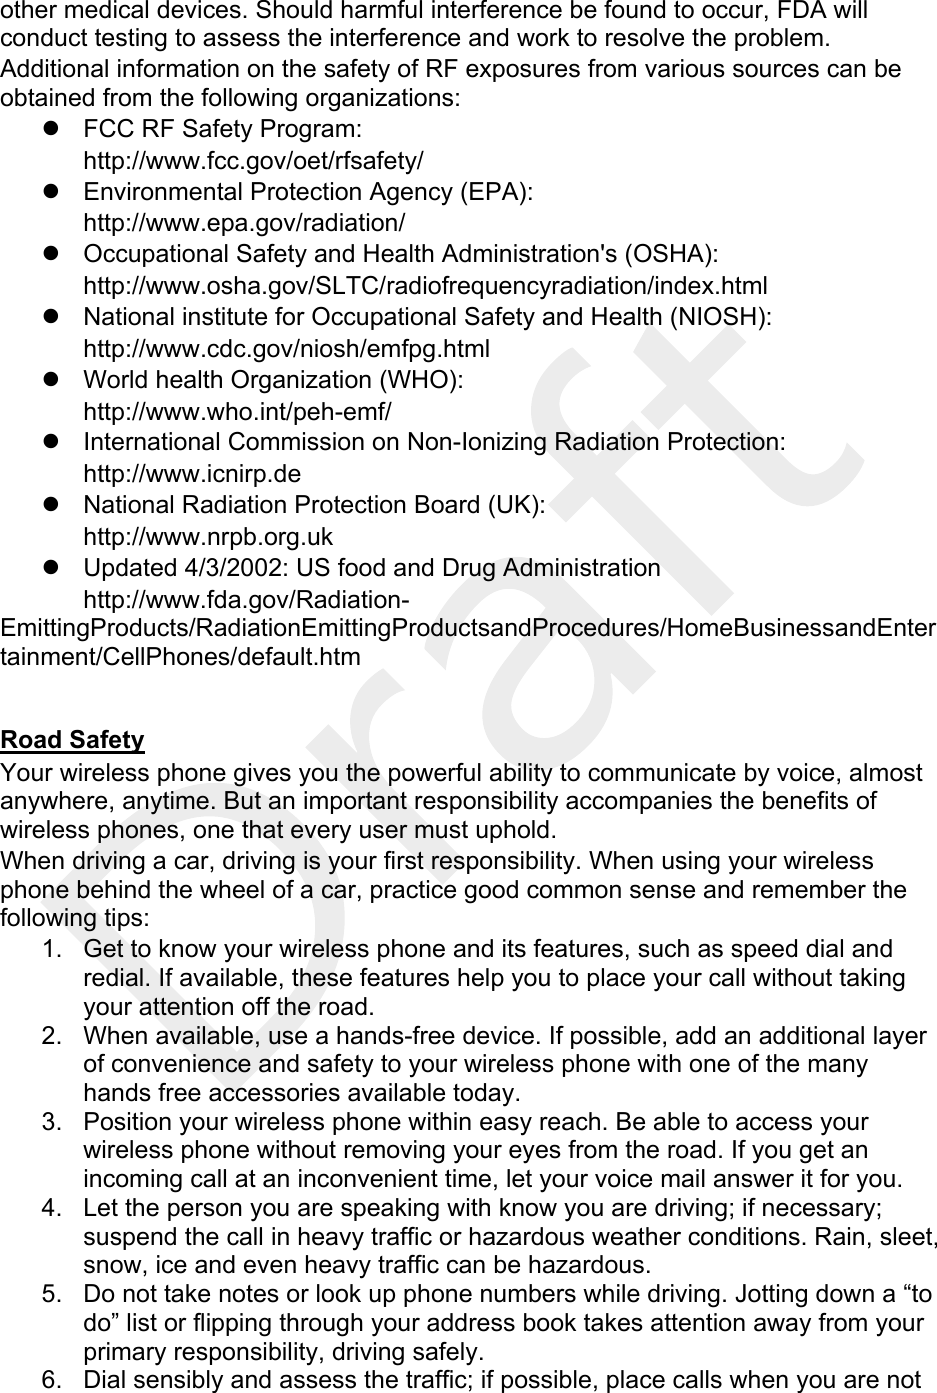  other medical devices. Should harmful interference be found to occur, FDA will conduct testing to assess the interference and work to resolve the problem. Additional information on the safety of RF exposures from various sources can be obtained from the following organizations: z  FCC RF Safety Program:  http://www.fcc.gov/oet/rfsafety/ z  Environmental Protection Agency (EPA):  http://www.epa.gov/radiation/ z  Occupational Safety and Health Administration&apos;s (OSHA):         http://www.osha.gov/SLTC/radiofrequencyradiation/index.html z  National institute for Occupational Safety and Health (NIOSH):  http://www.cdc.gov/niosh/emfpg.html  z  World health Organization (WHO):  http://www.who.int/peh-emf/ z  International Commission on Non-Ionizing Radiation Protection:  http://www.icnirp.de z  National Radiation Protection Board (UK):  http://www.nrpb.org.uk z  Updated 4/3/2002: US food and Drug Administration  http://www.fda.gov/Radiation-EmittingProducts/RadiationEmittingProductsandProcedures/HomeBusinessandEntertainment/CellPhones/default.htm  Road Safety Your wireless phone gives you the powerful ability to communicate by voice, almost anywhere, anytime. But an important responsibility accompanies the benefits of wireless phones, one that every user must uphold. When driving a car, driving is your first responsibility. When using your wireless phone behind the wheel of a car, practice good common sense and remember the following tips: 1.  Get to know your wireless phone and its features, such as speed dial and redial. If available, these features help you to place your call without taking your attention off the road. 2.  When available, use a hands-free device. If possible, add an additional layer of convenience and safety to your wireless phone with one of the many hands free accessories available today. 3.  Position your wireless phone within easy reach. Be able to access your wireless phone without removing your eyes from the road. If you get an incoming call at an inconvenient time, let your voice mail answer it for you. 4.  Let the person you are speaking with know you are driving; if necessary; suspend the call in heavy traffic or hazardous weather conditions. Rain, sleet, snow, ice and even heavy traffic can be hazardous. 5.  Do not take notes or look up phone numbers while driving. Jotting down a “to do” list or flipping through your address book takes attention away from your primary responsibility, driving safely. 6.  Dial sensibly and assess the traffic; if possible, place calls when you are not 